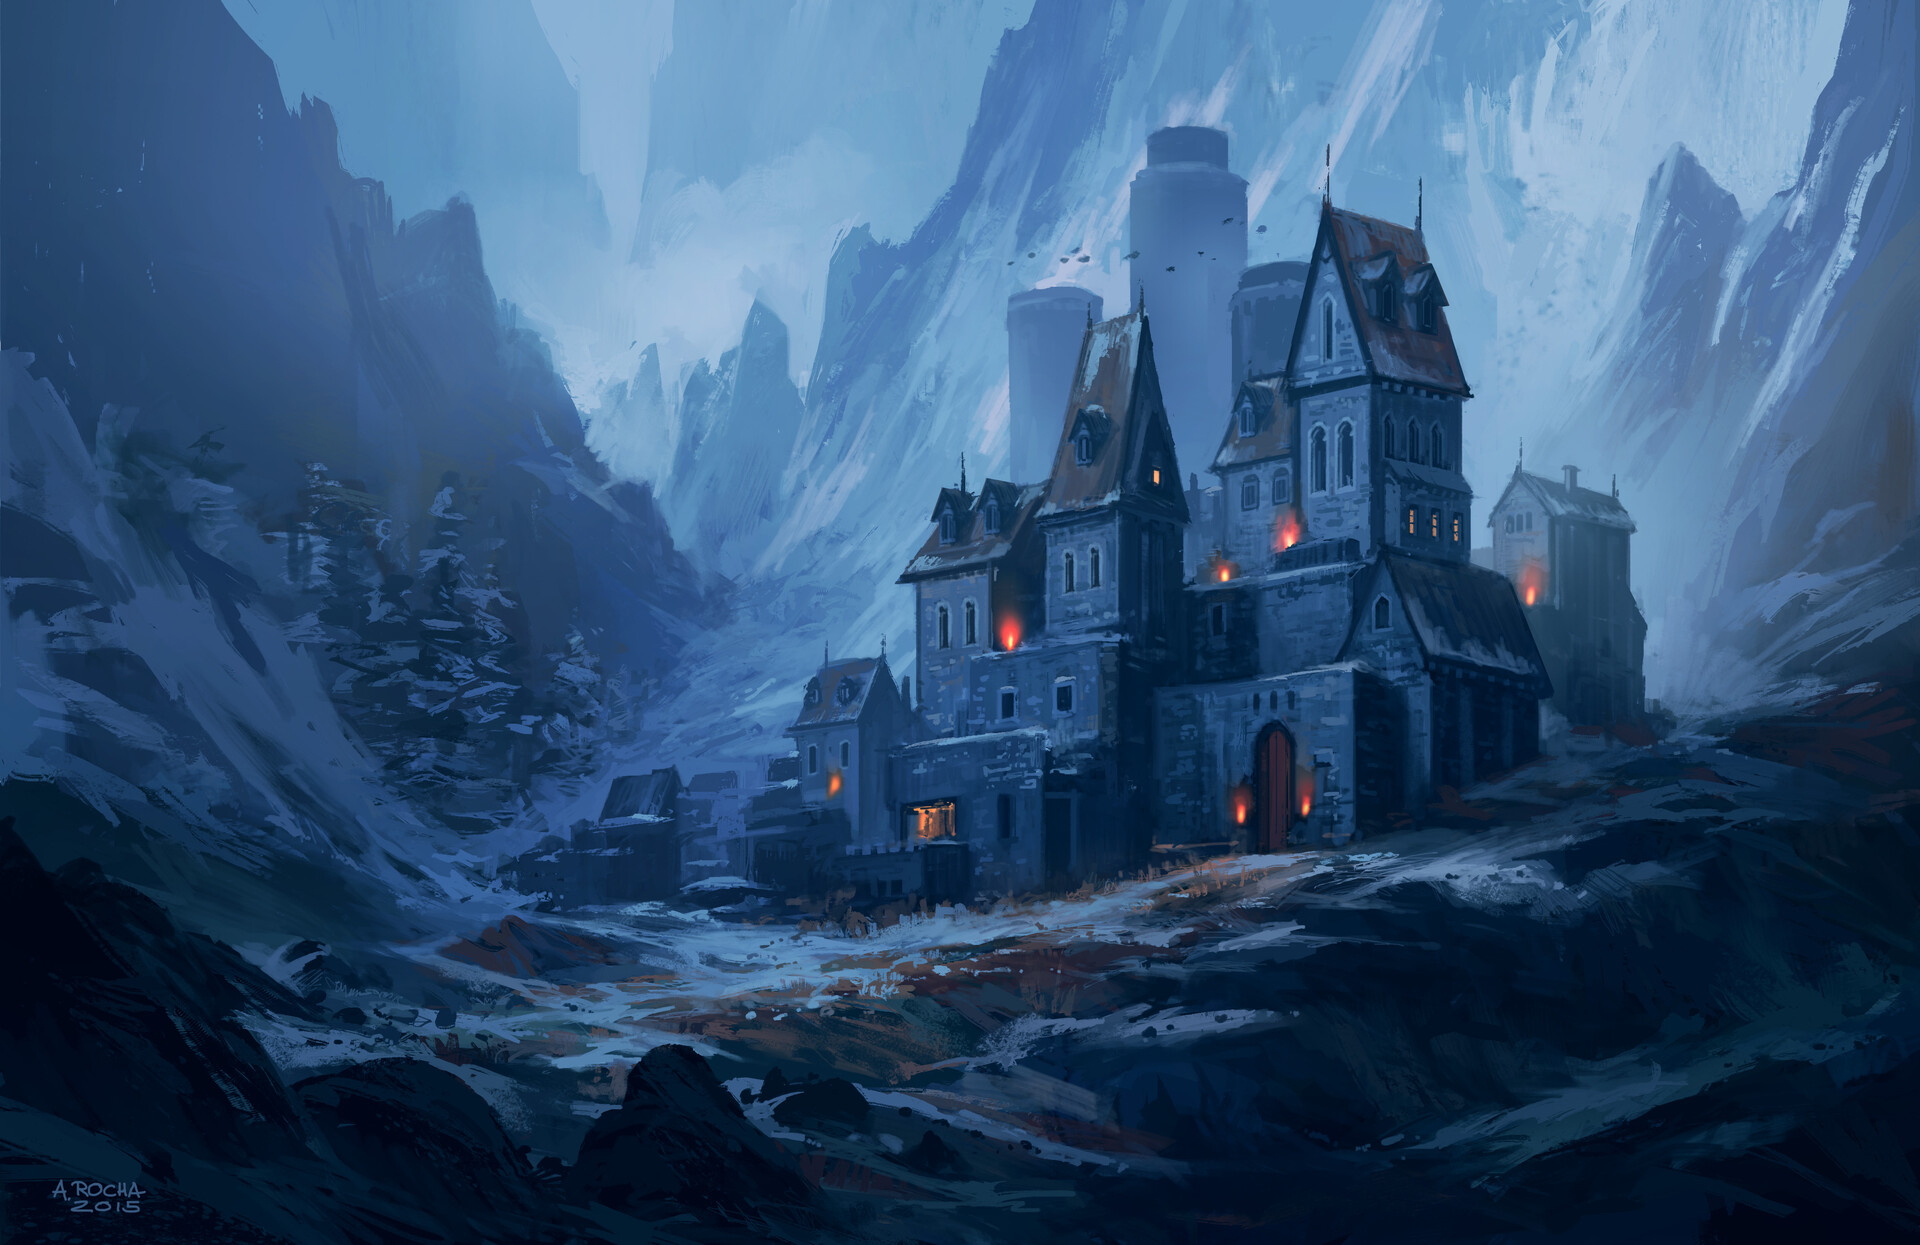 General 1920x1245 Andreas Rocha nature castle house mountains winter torches snow